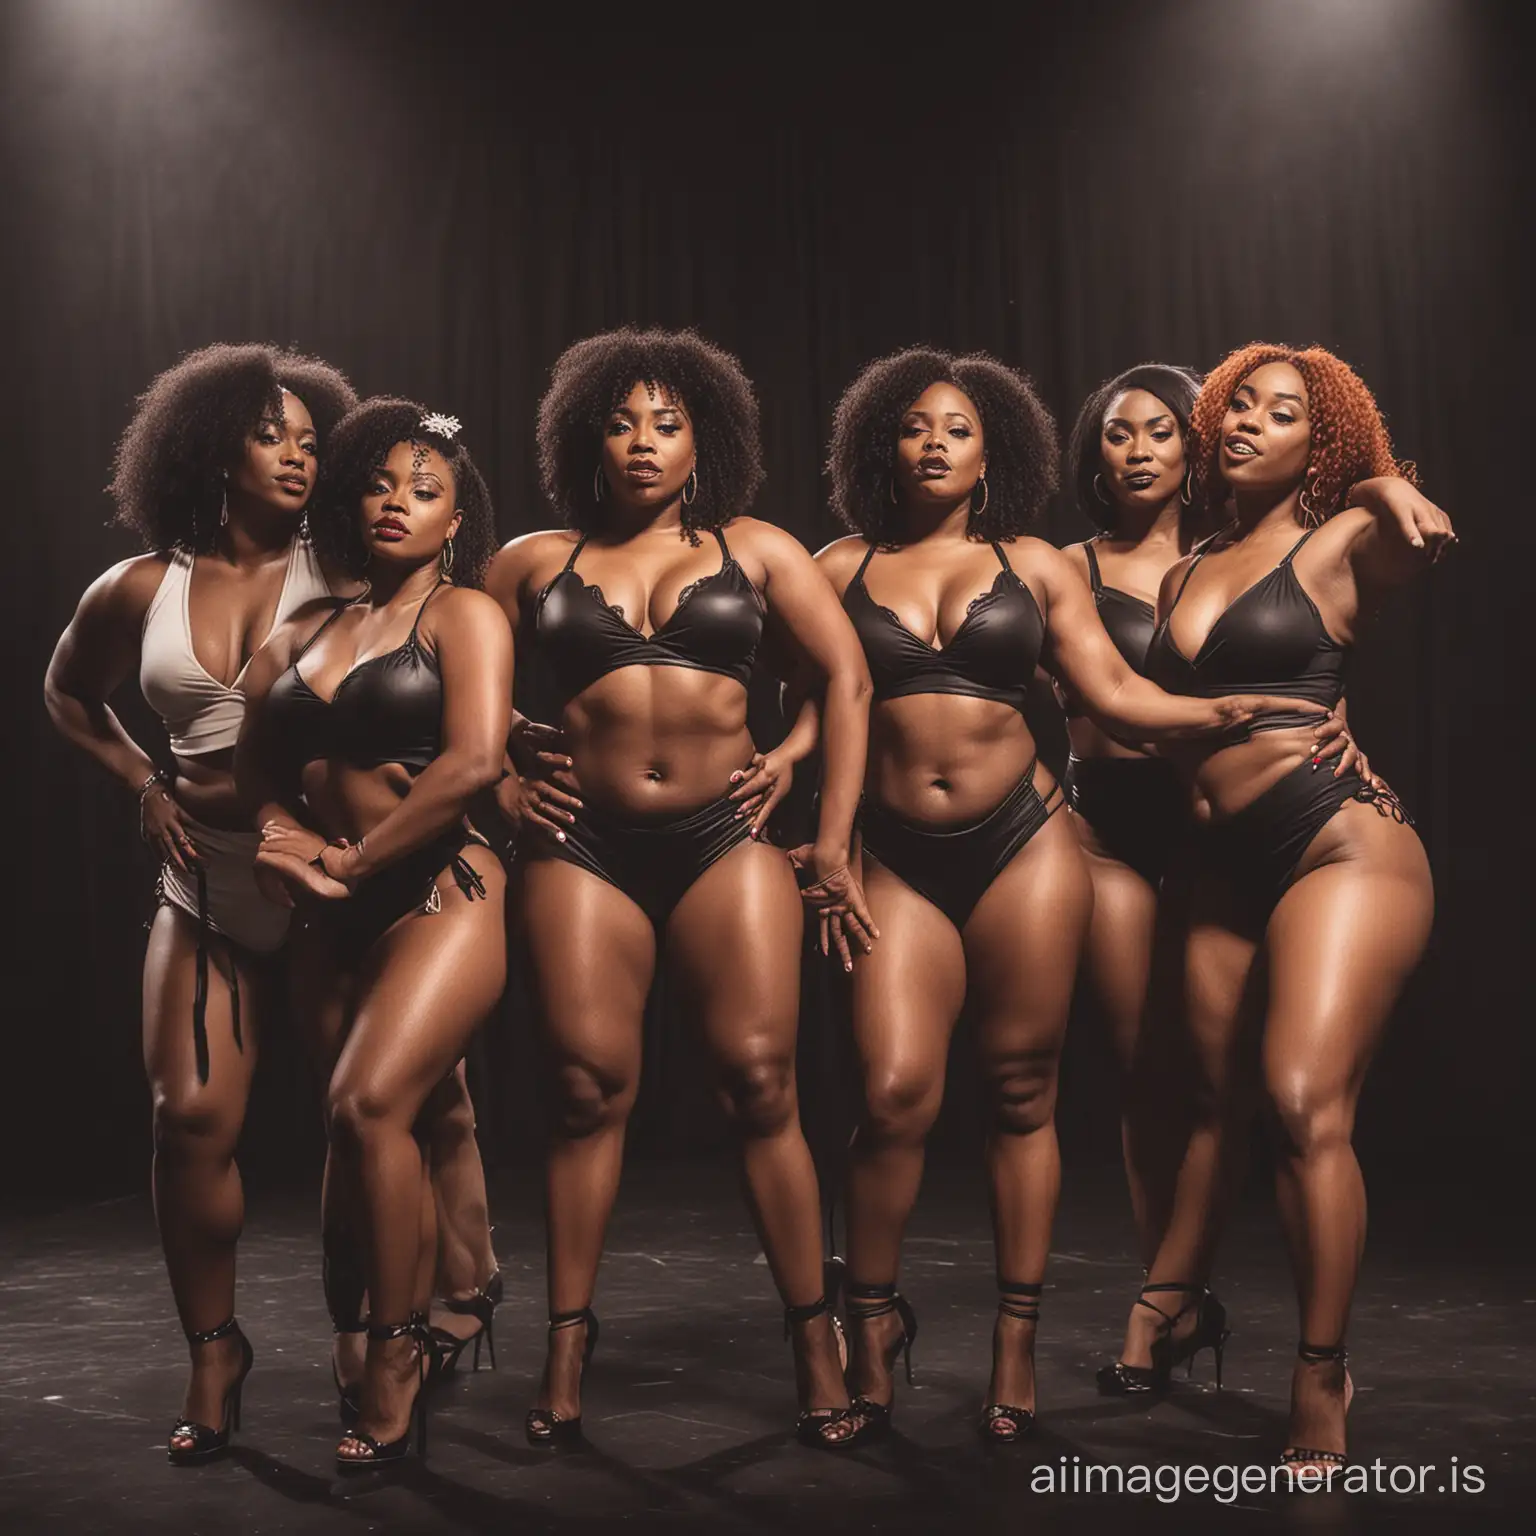 Hip-hop, Rnb, Neo soul themed cirque type show featuring curvy black women include the words Erotic Cirque